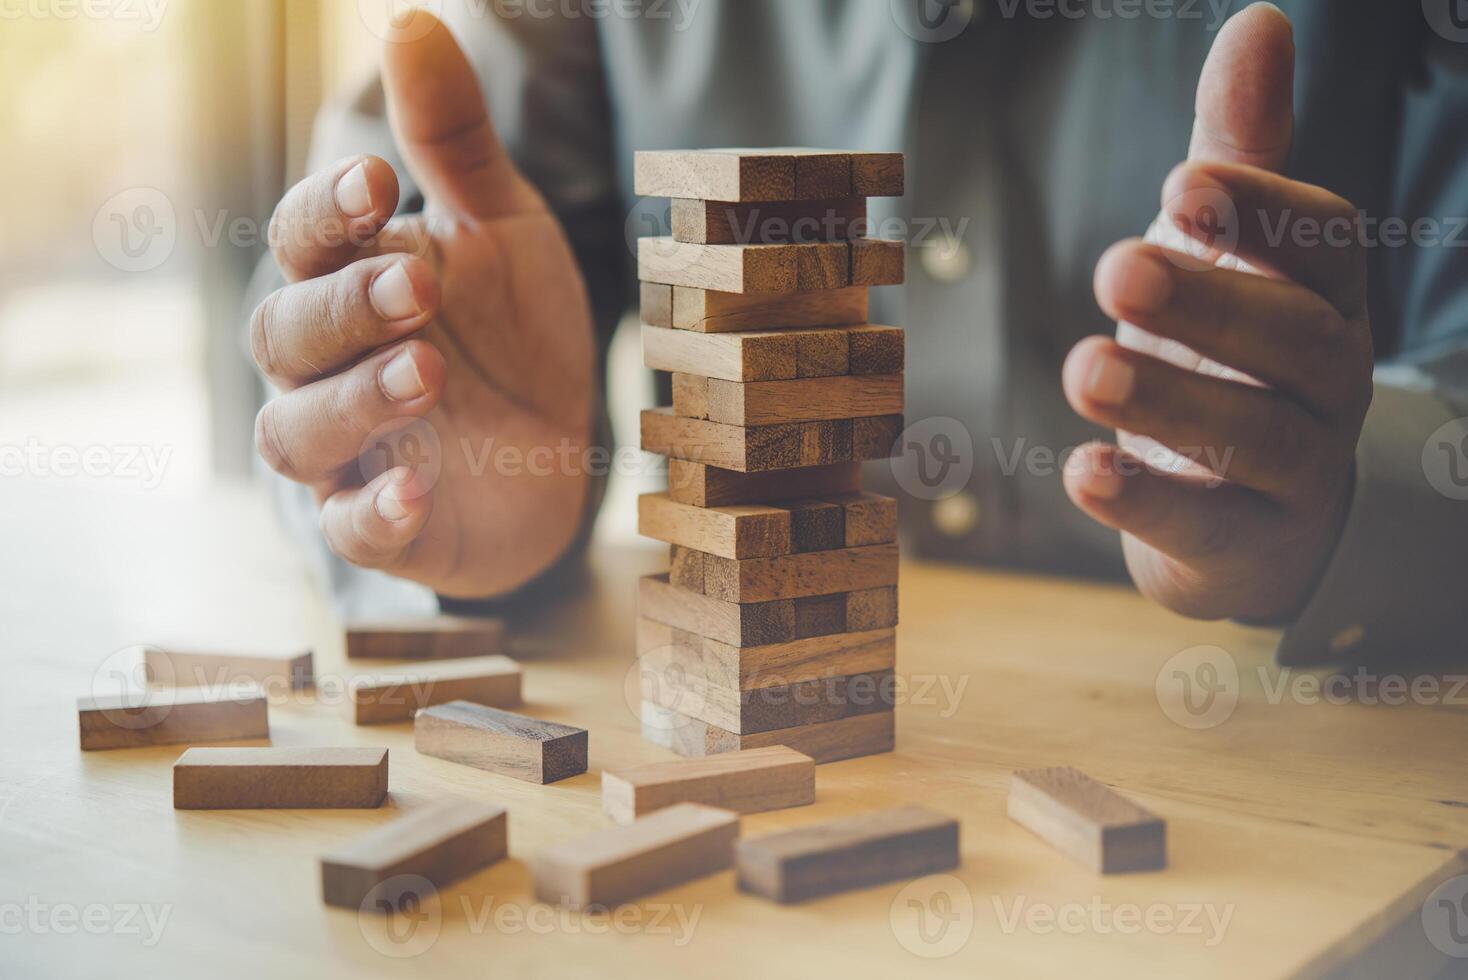 Business risks in the business. Requires planning Meditation must be careful in deciding to reduce the risk in the business. As the game drew to a wooden block from the tower photo